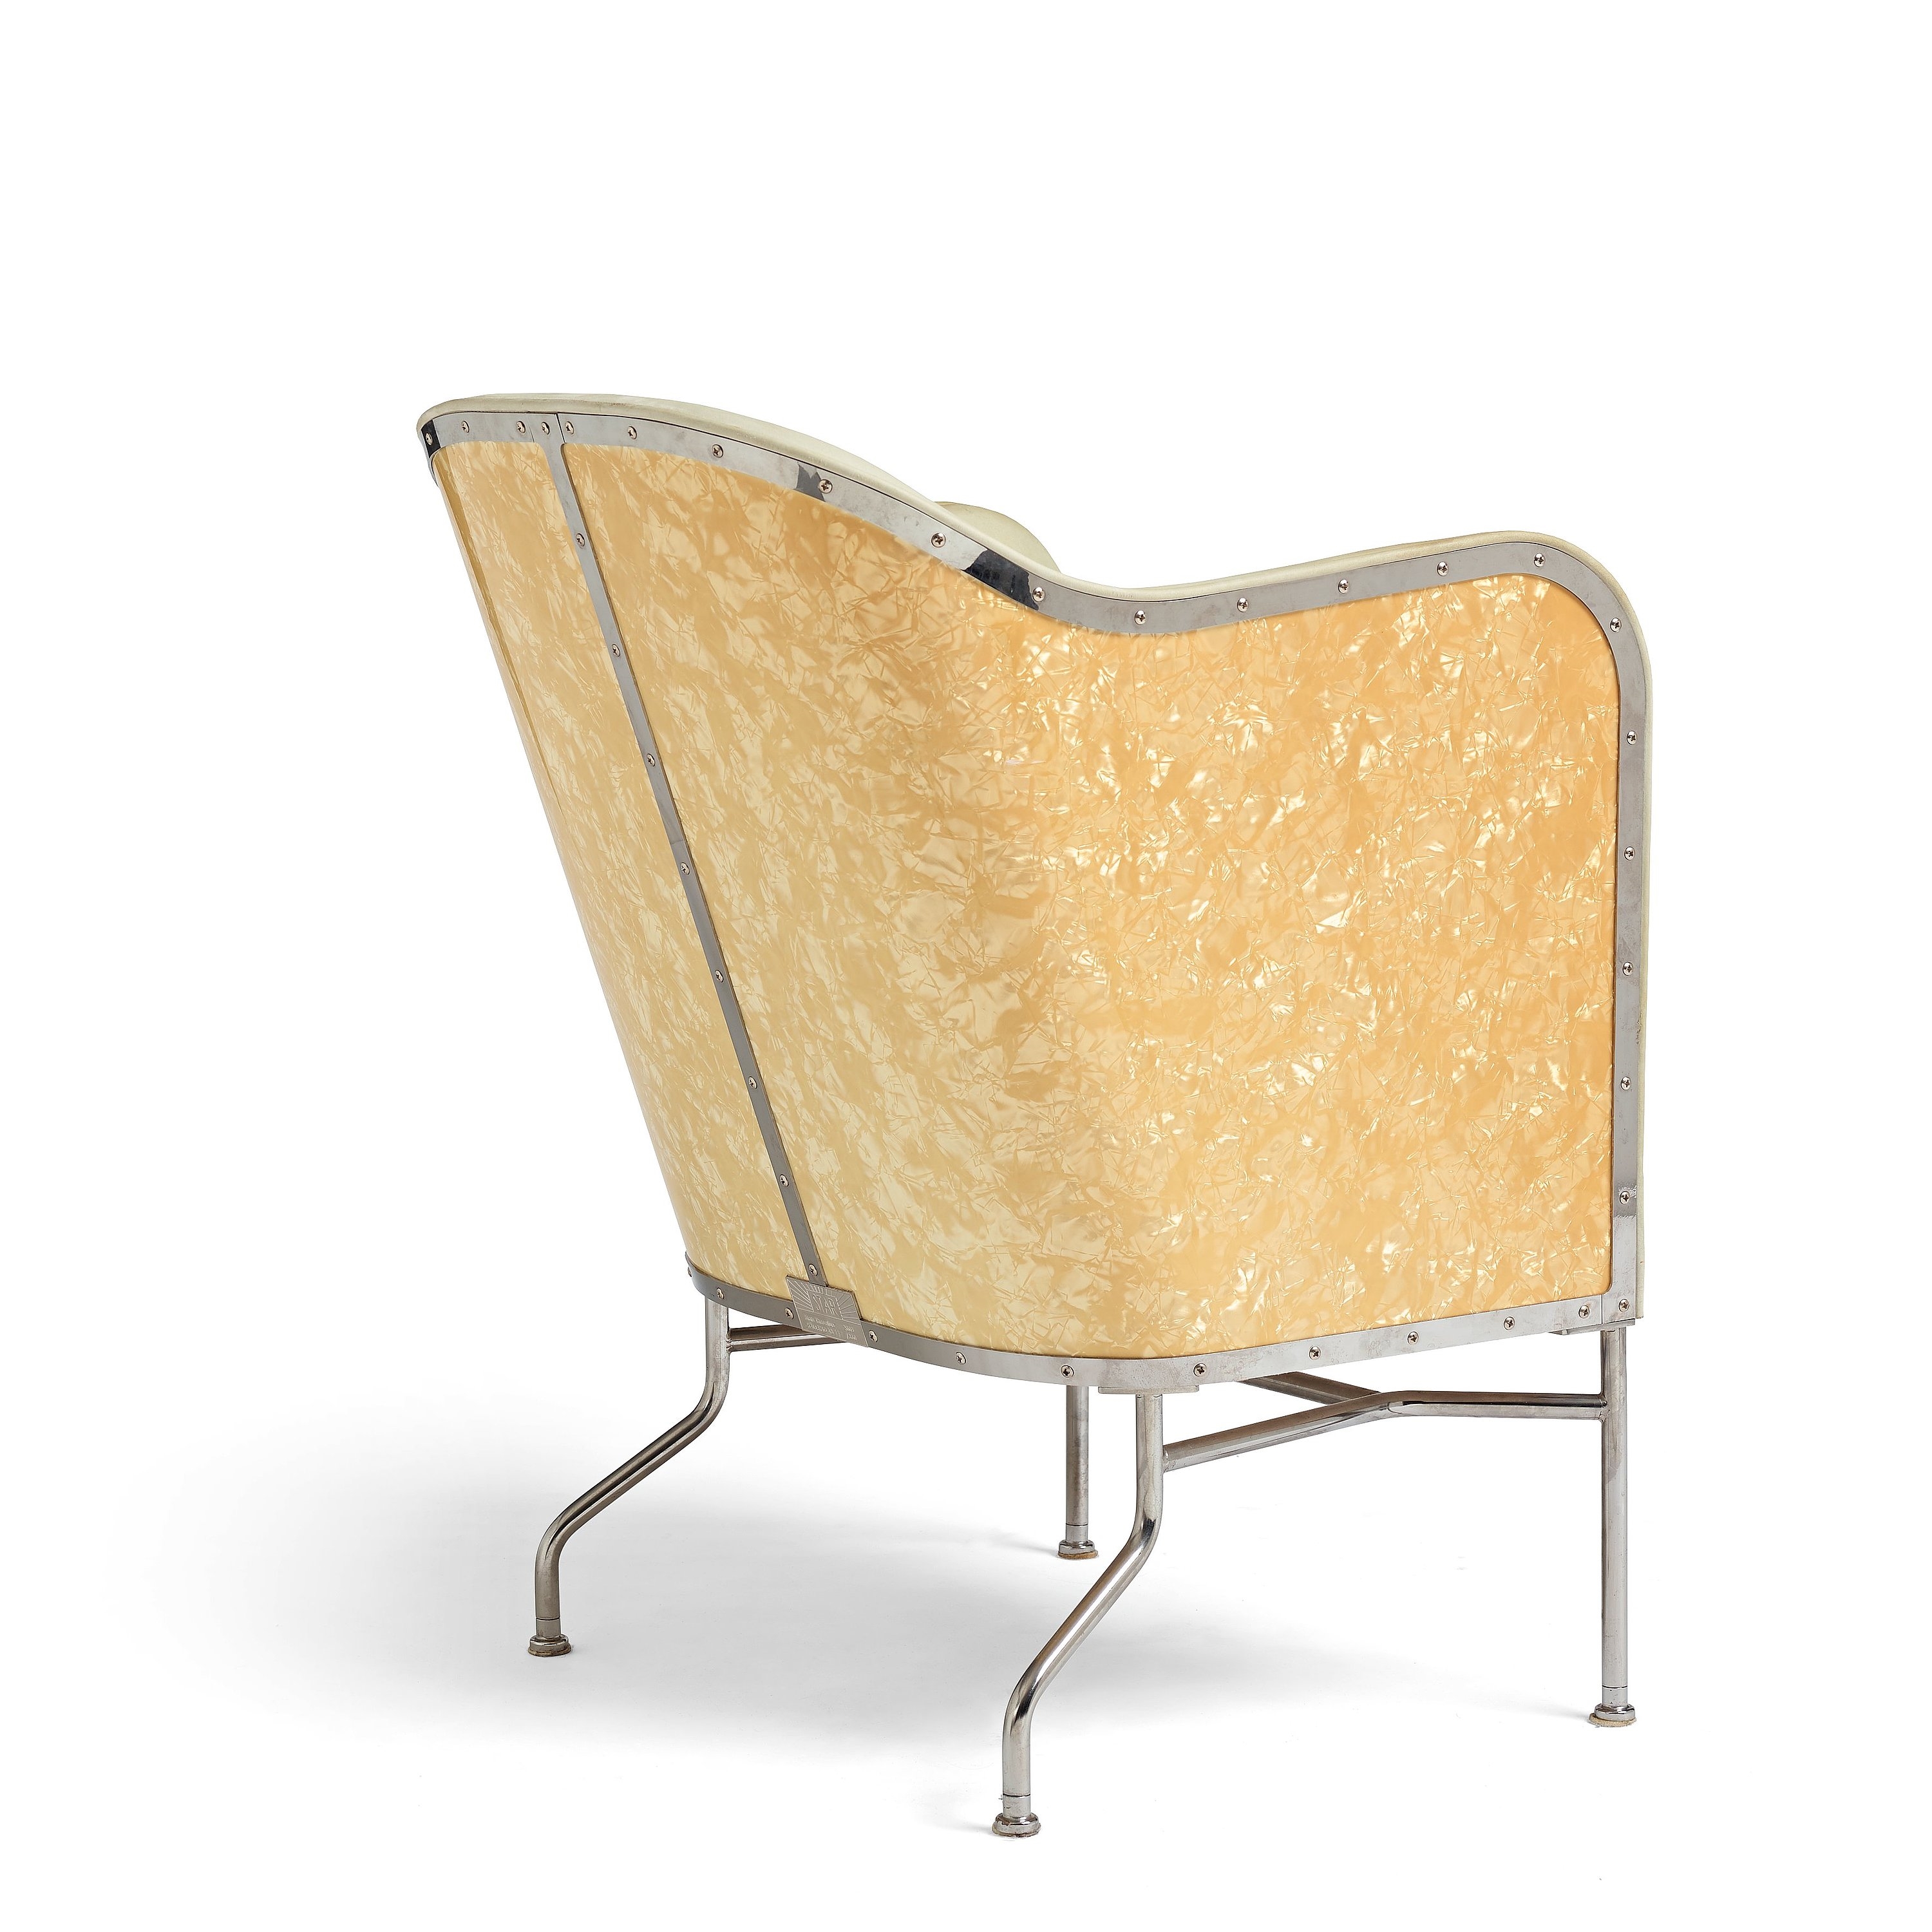 Theselius a 'Star' chair | MutualArt